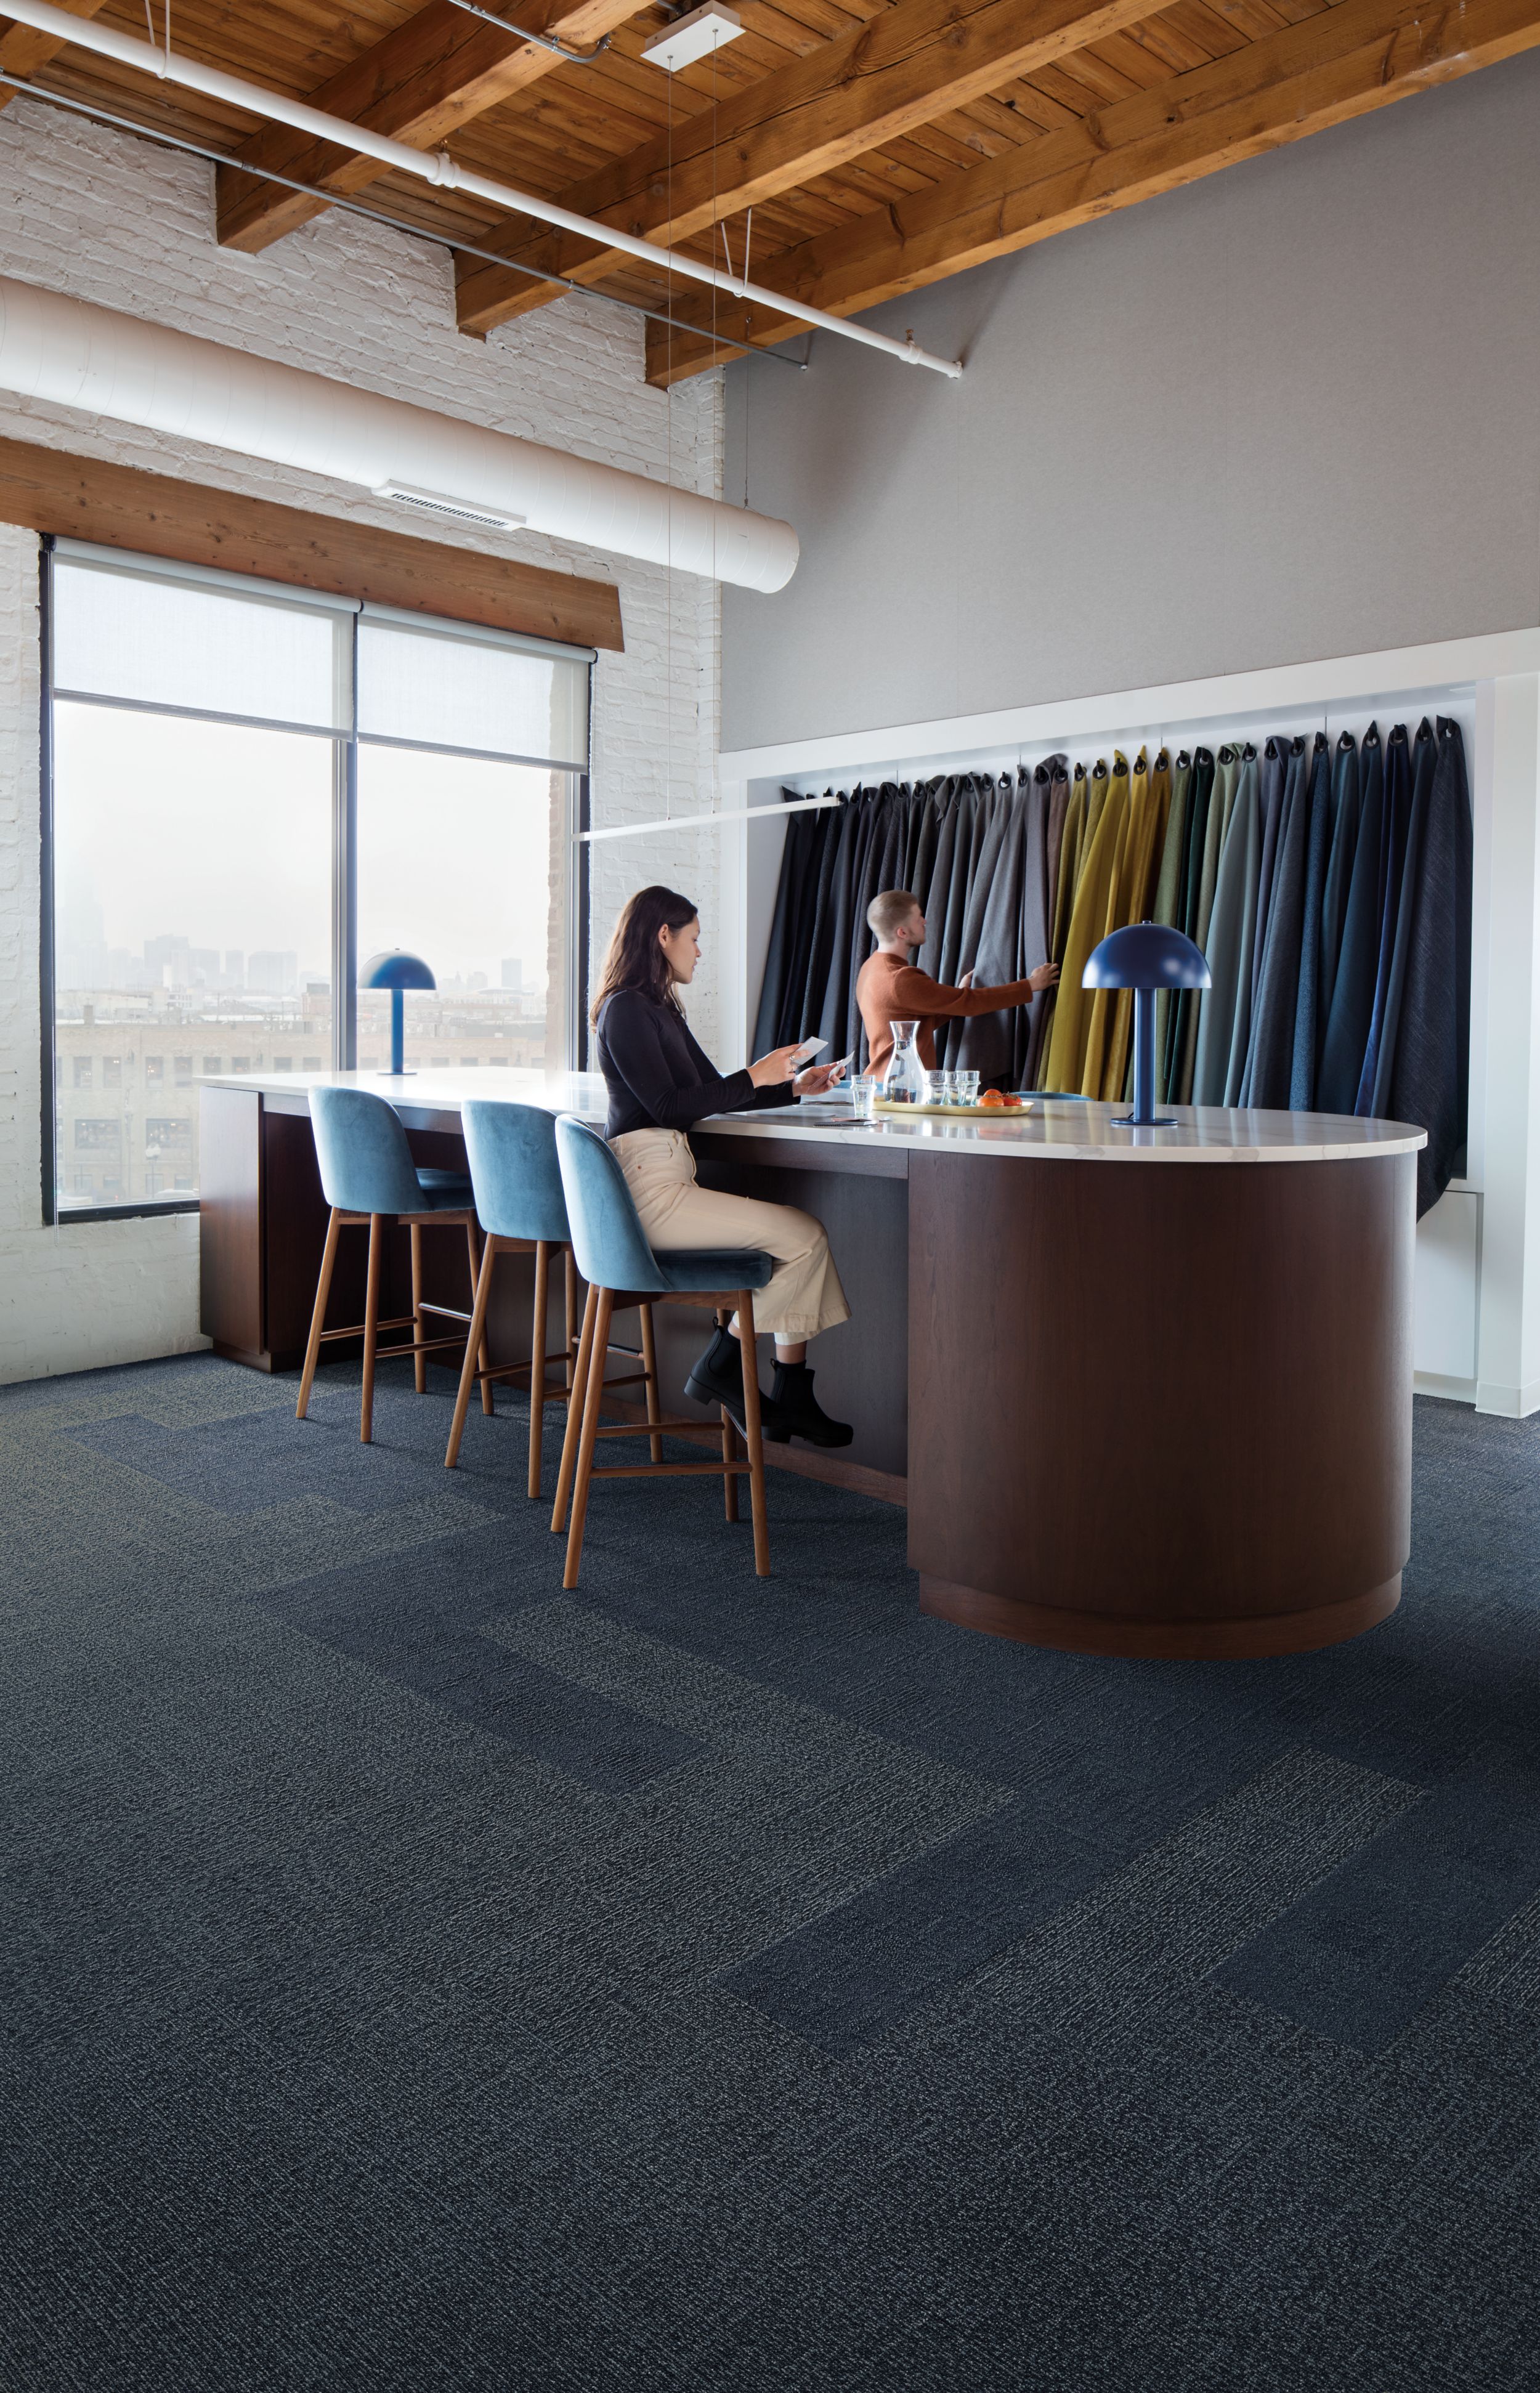 Interface Shishu Stitch and Vintage Kimono plank carpet tile in workspace with bar height table and person sitting Bildnummer 6